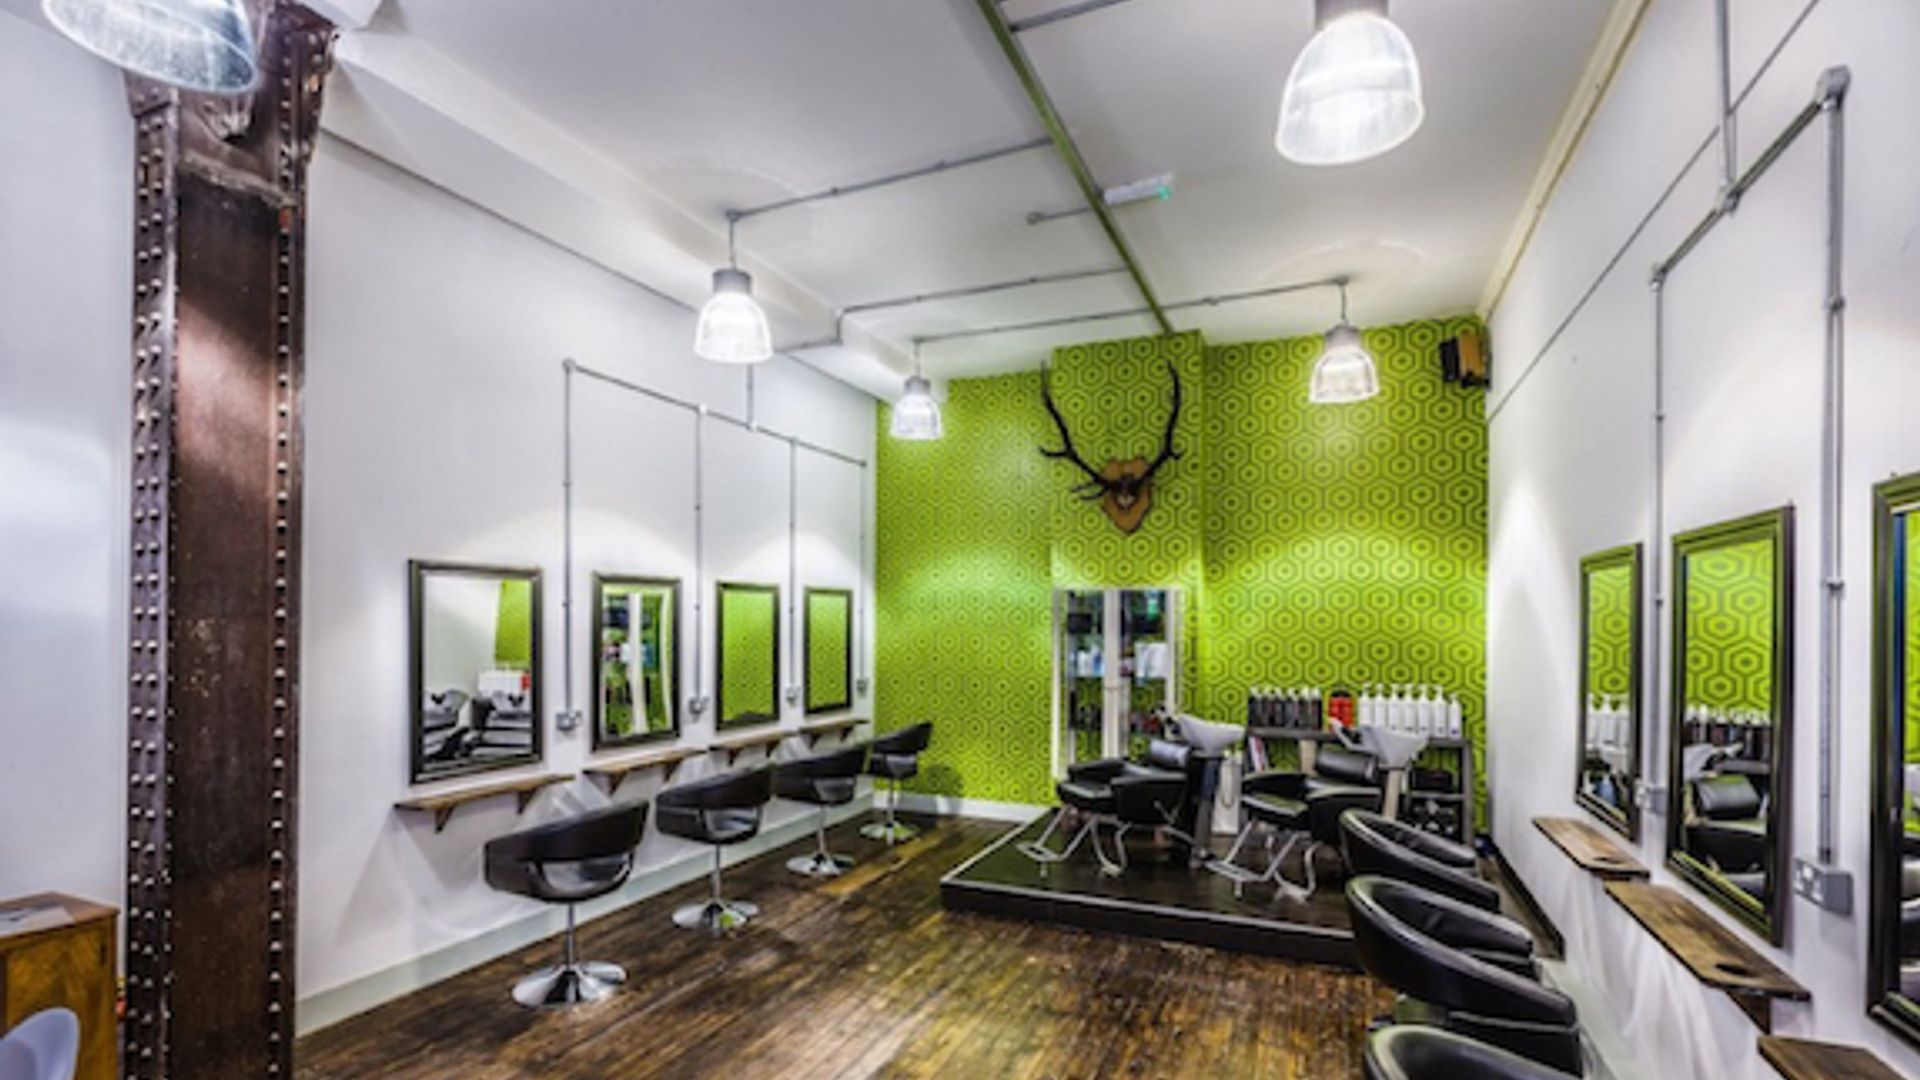 The best hair salons outside of London